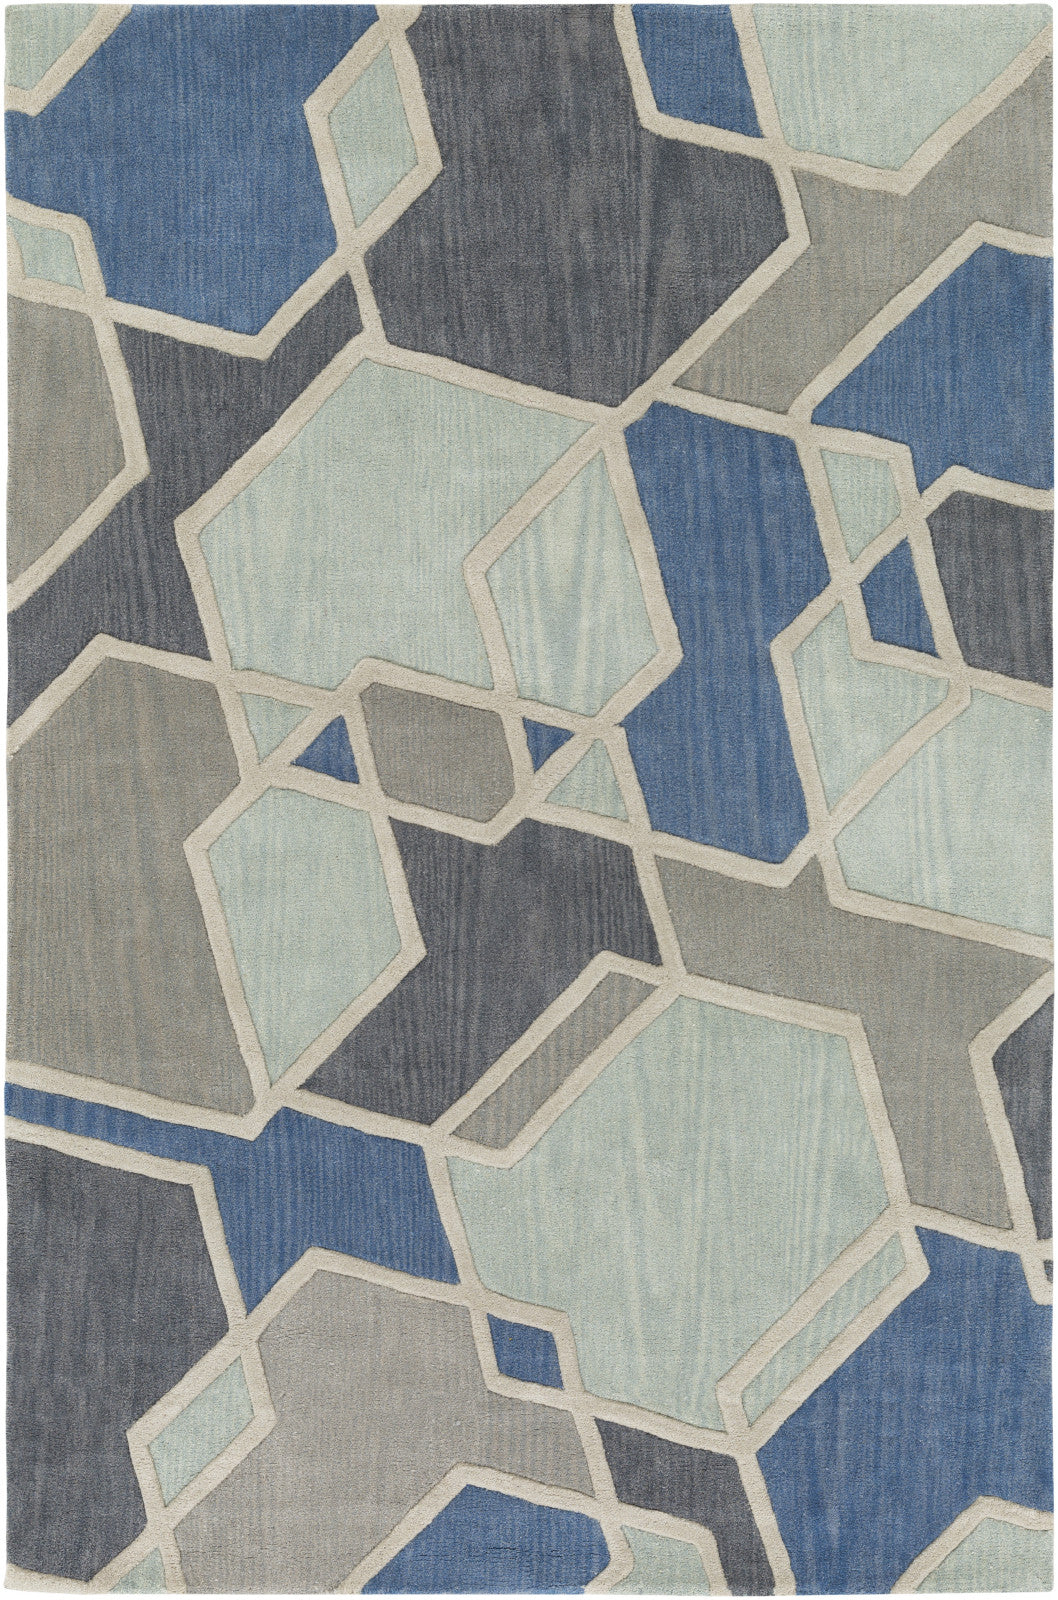 Oasis OAS-1121 Green Area Rug by Surya